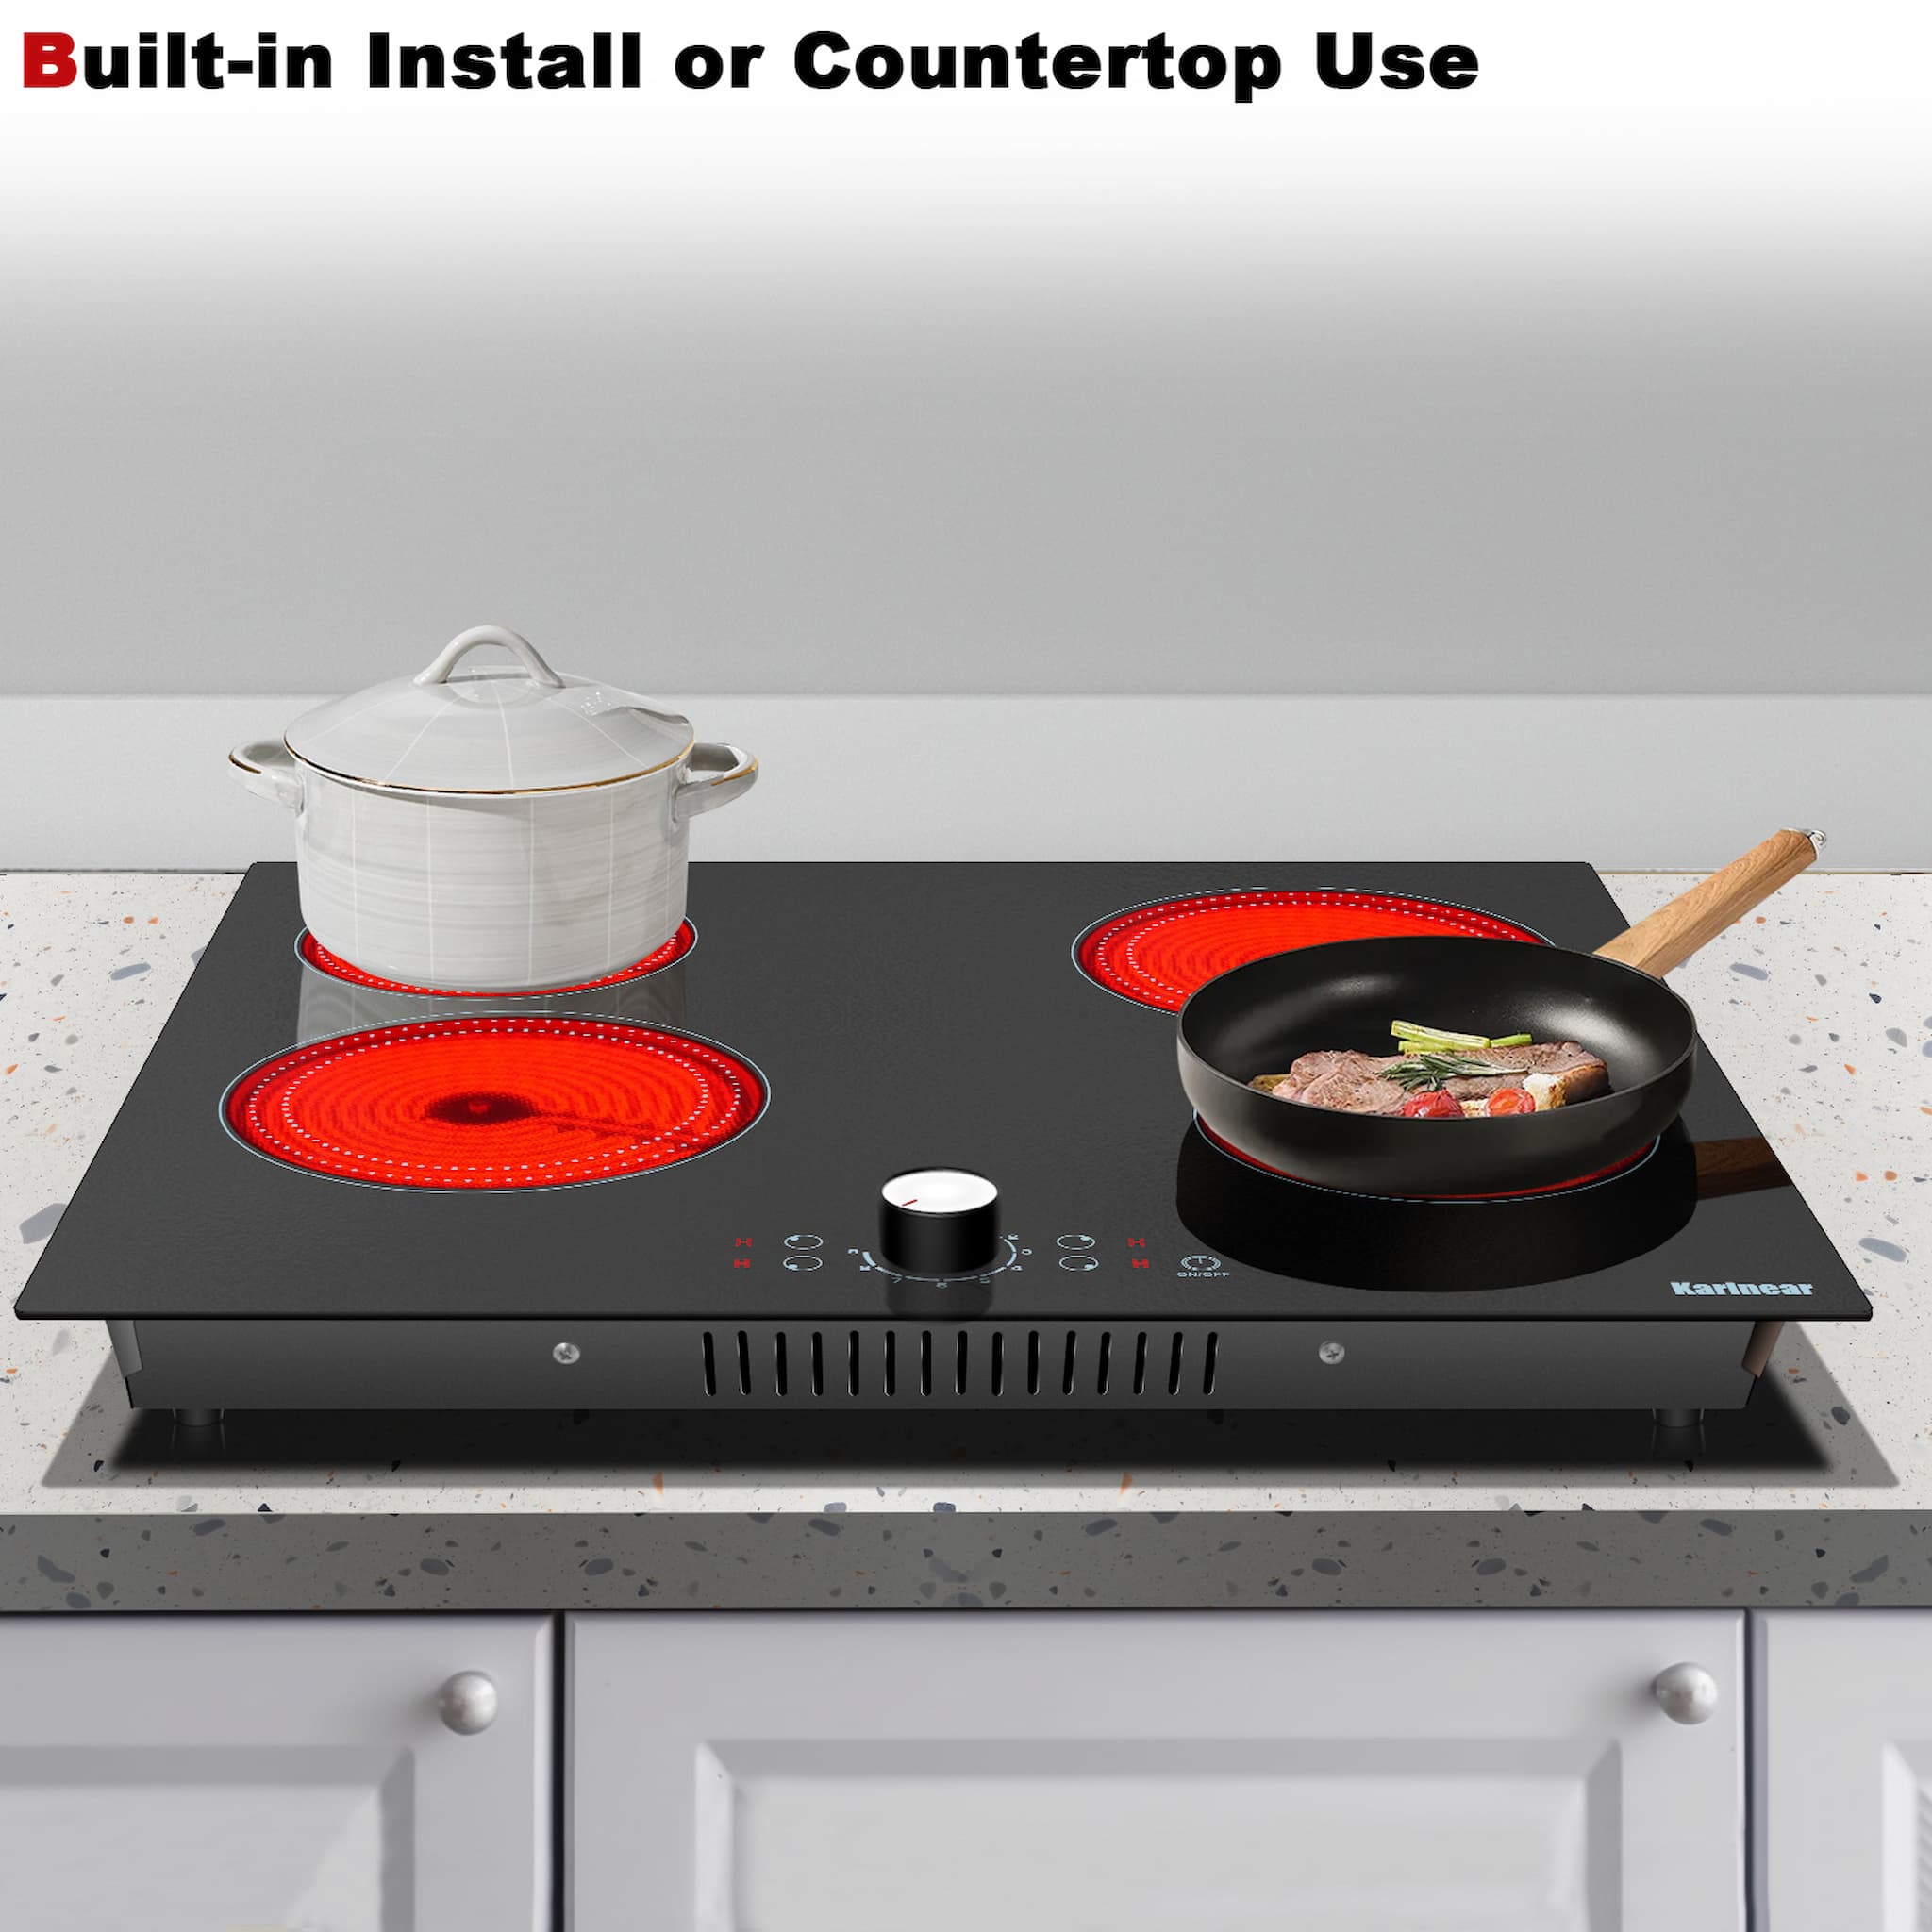 Knob Control, Easy to Use The 24-inch electric cooktop is very simple to operate, a knob can control the power of four burners, and even the elderly can be used without obstacles.